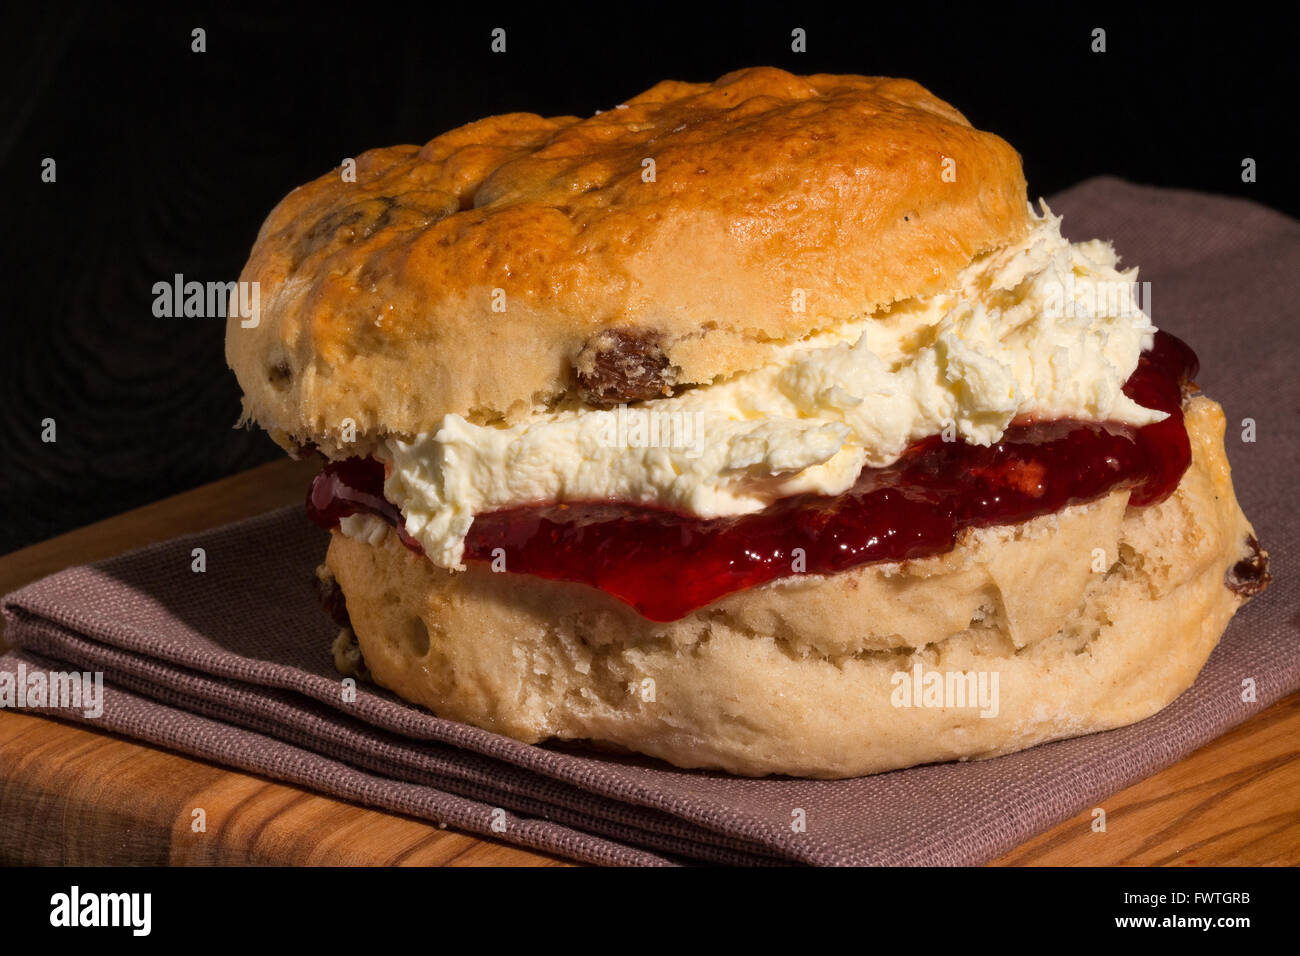 Freshly baked and served scone packed full of delicious strawberry jam and Cornish clotted cream Stock Photo